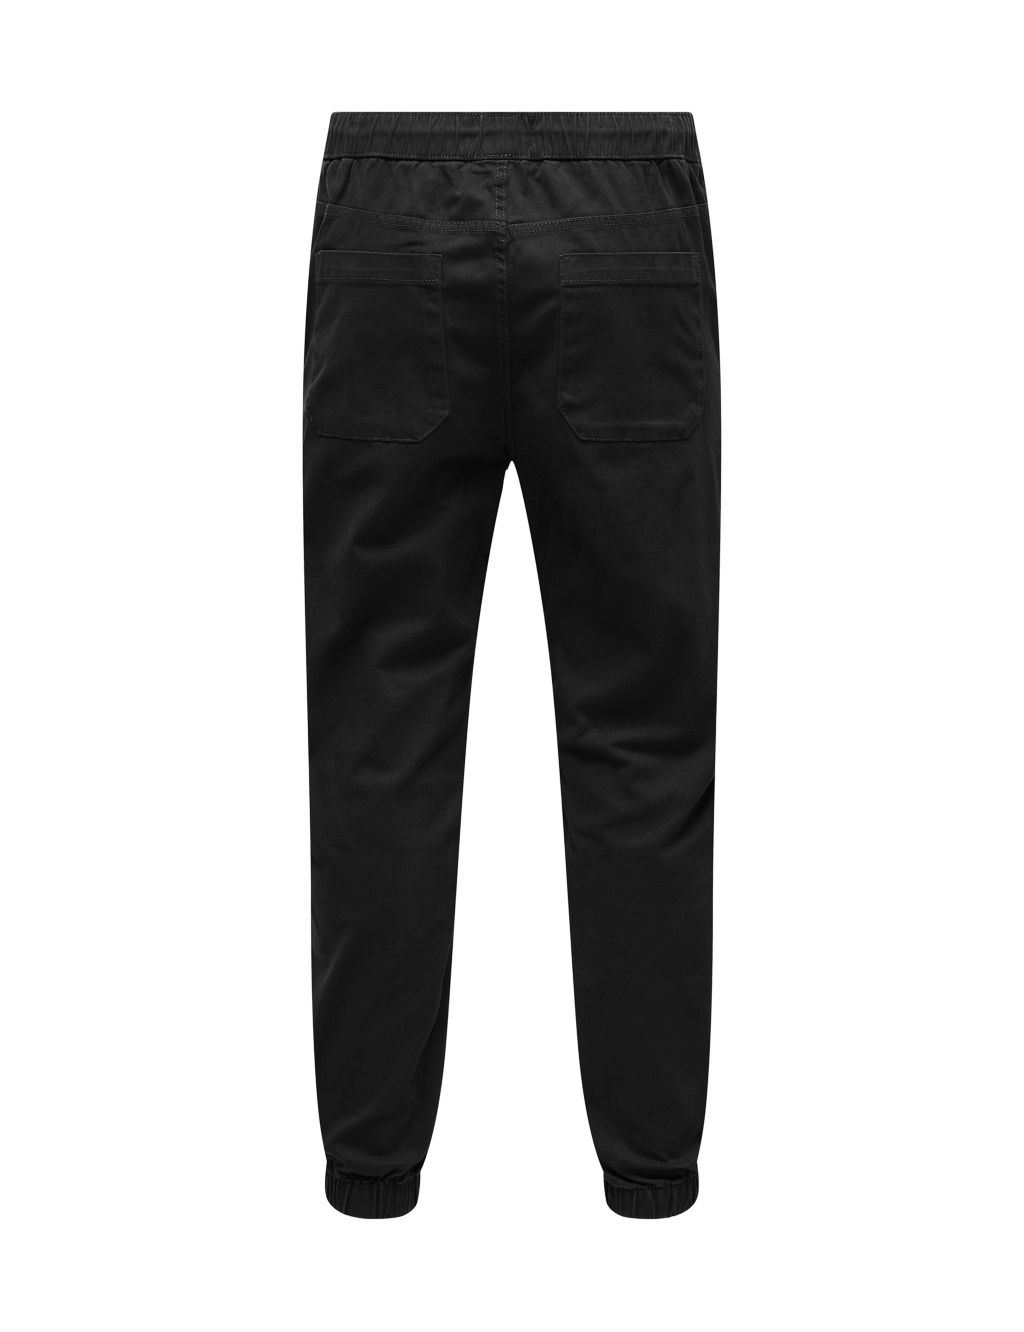 Tapered Fit Cuffed Chinos image 7